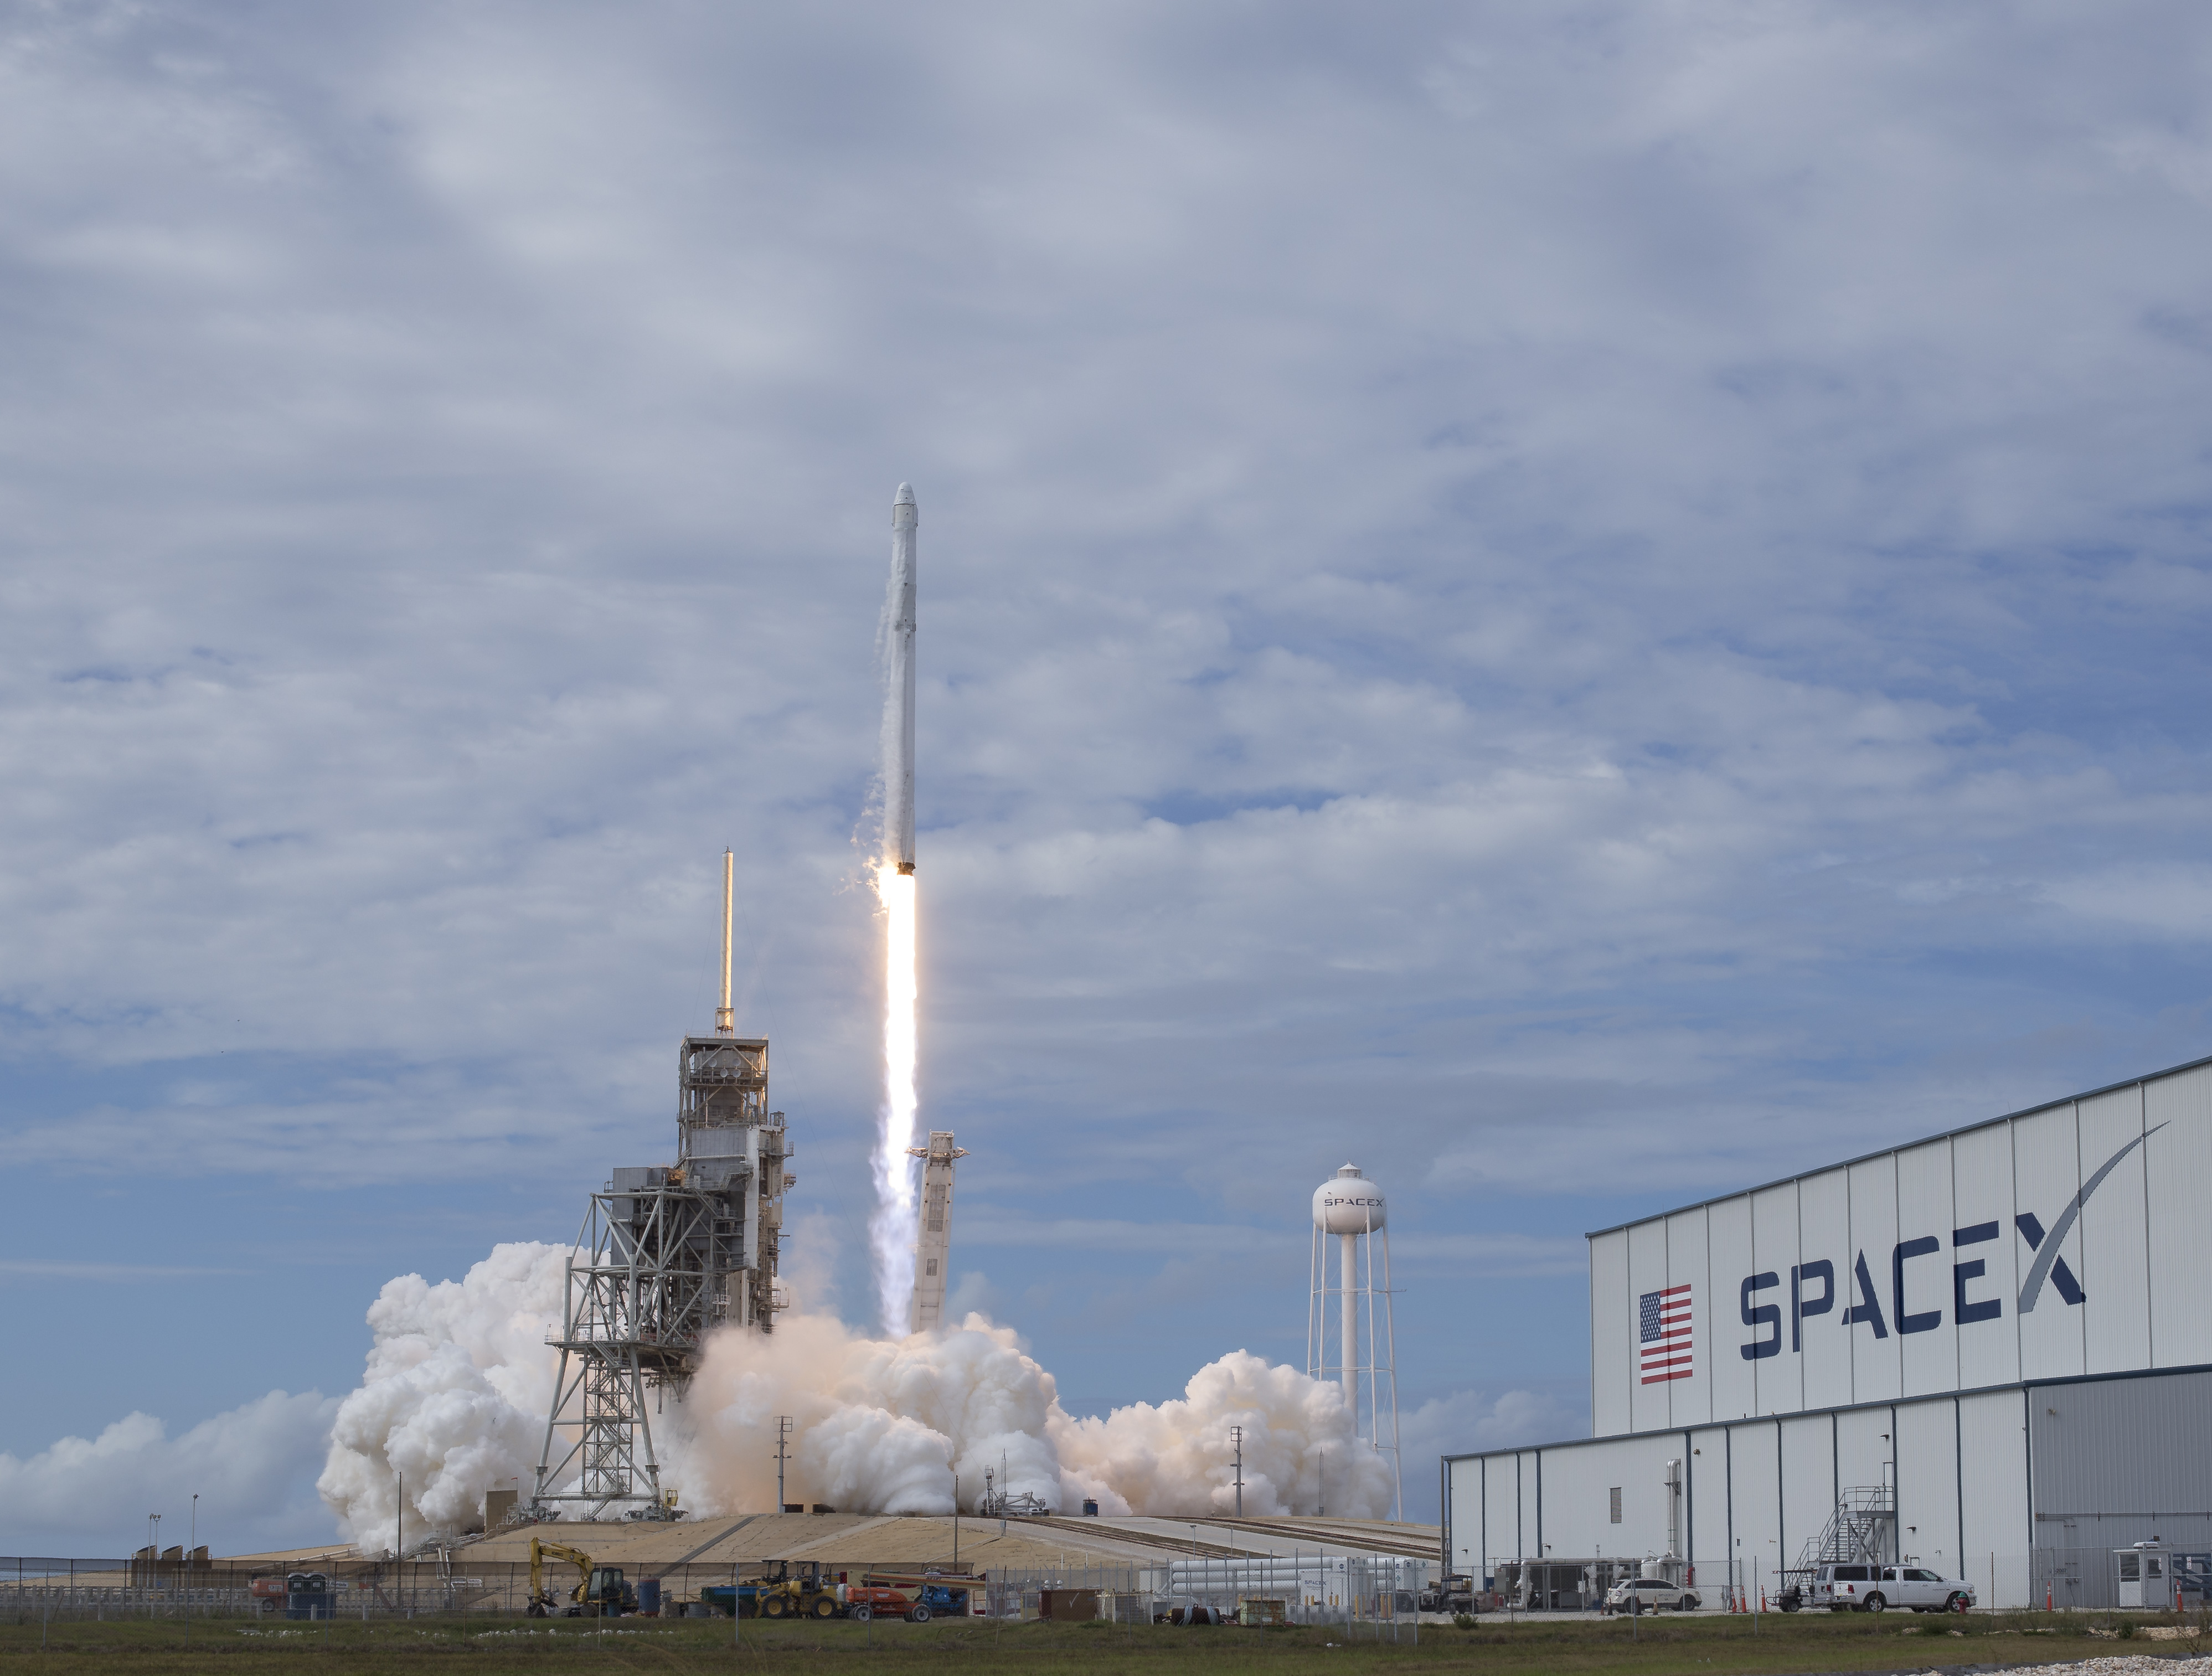 In this handout provided by NASA, a SpaceX Falcon 9 rocket launches from Kennedy Space Center on June 3, 2017. (Bill Ingalls—NASA/Getty Images)